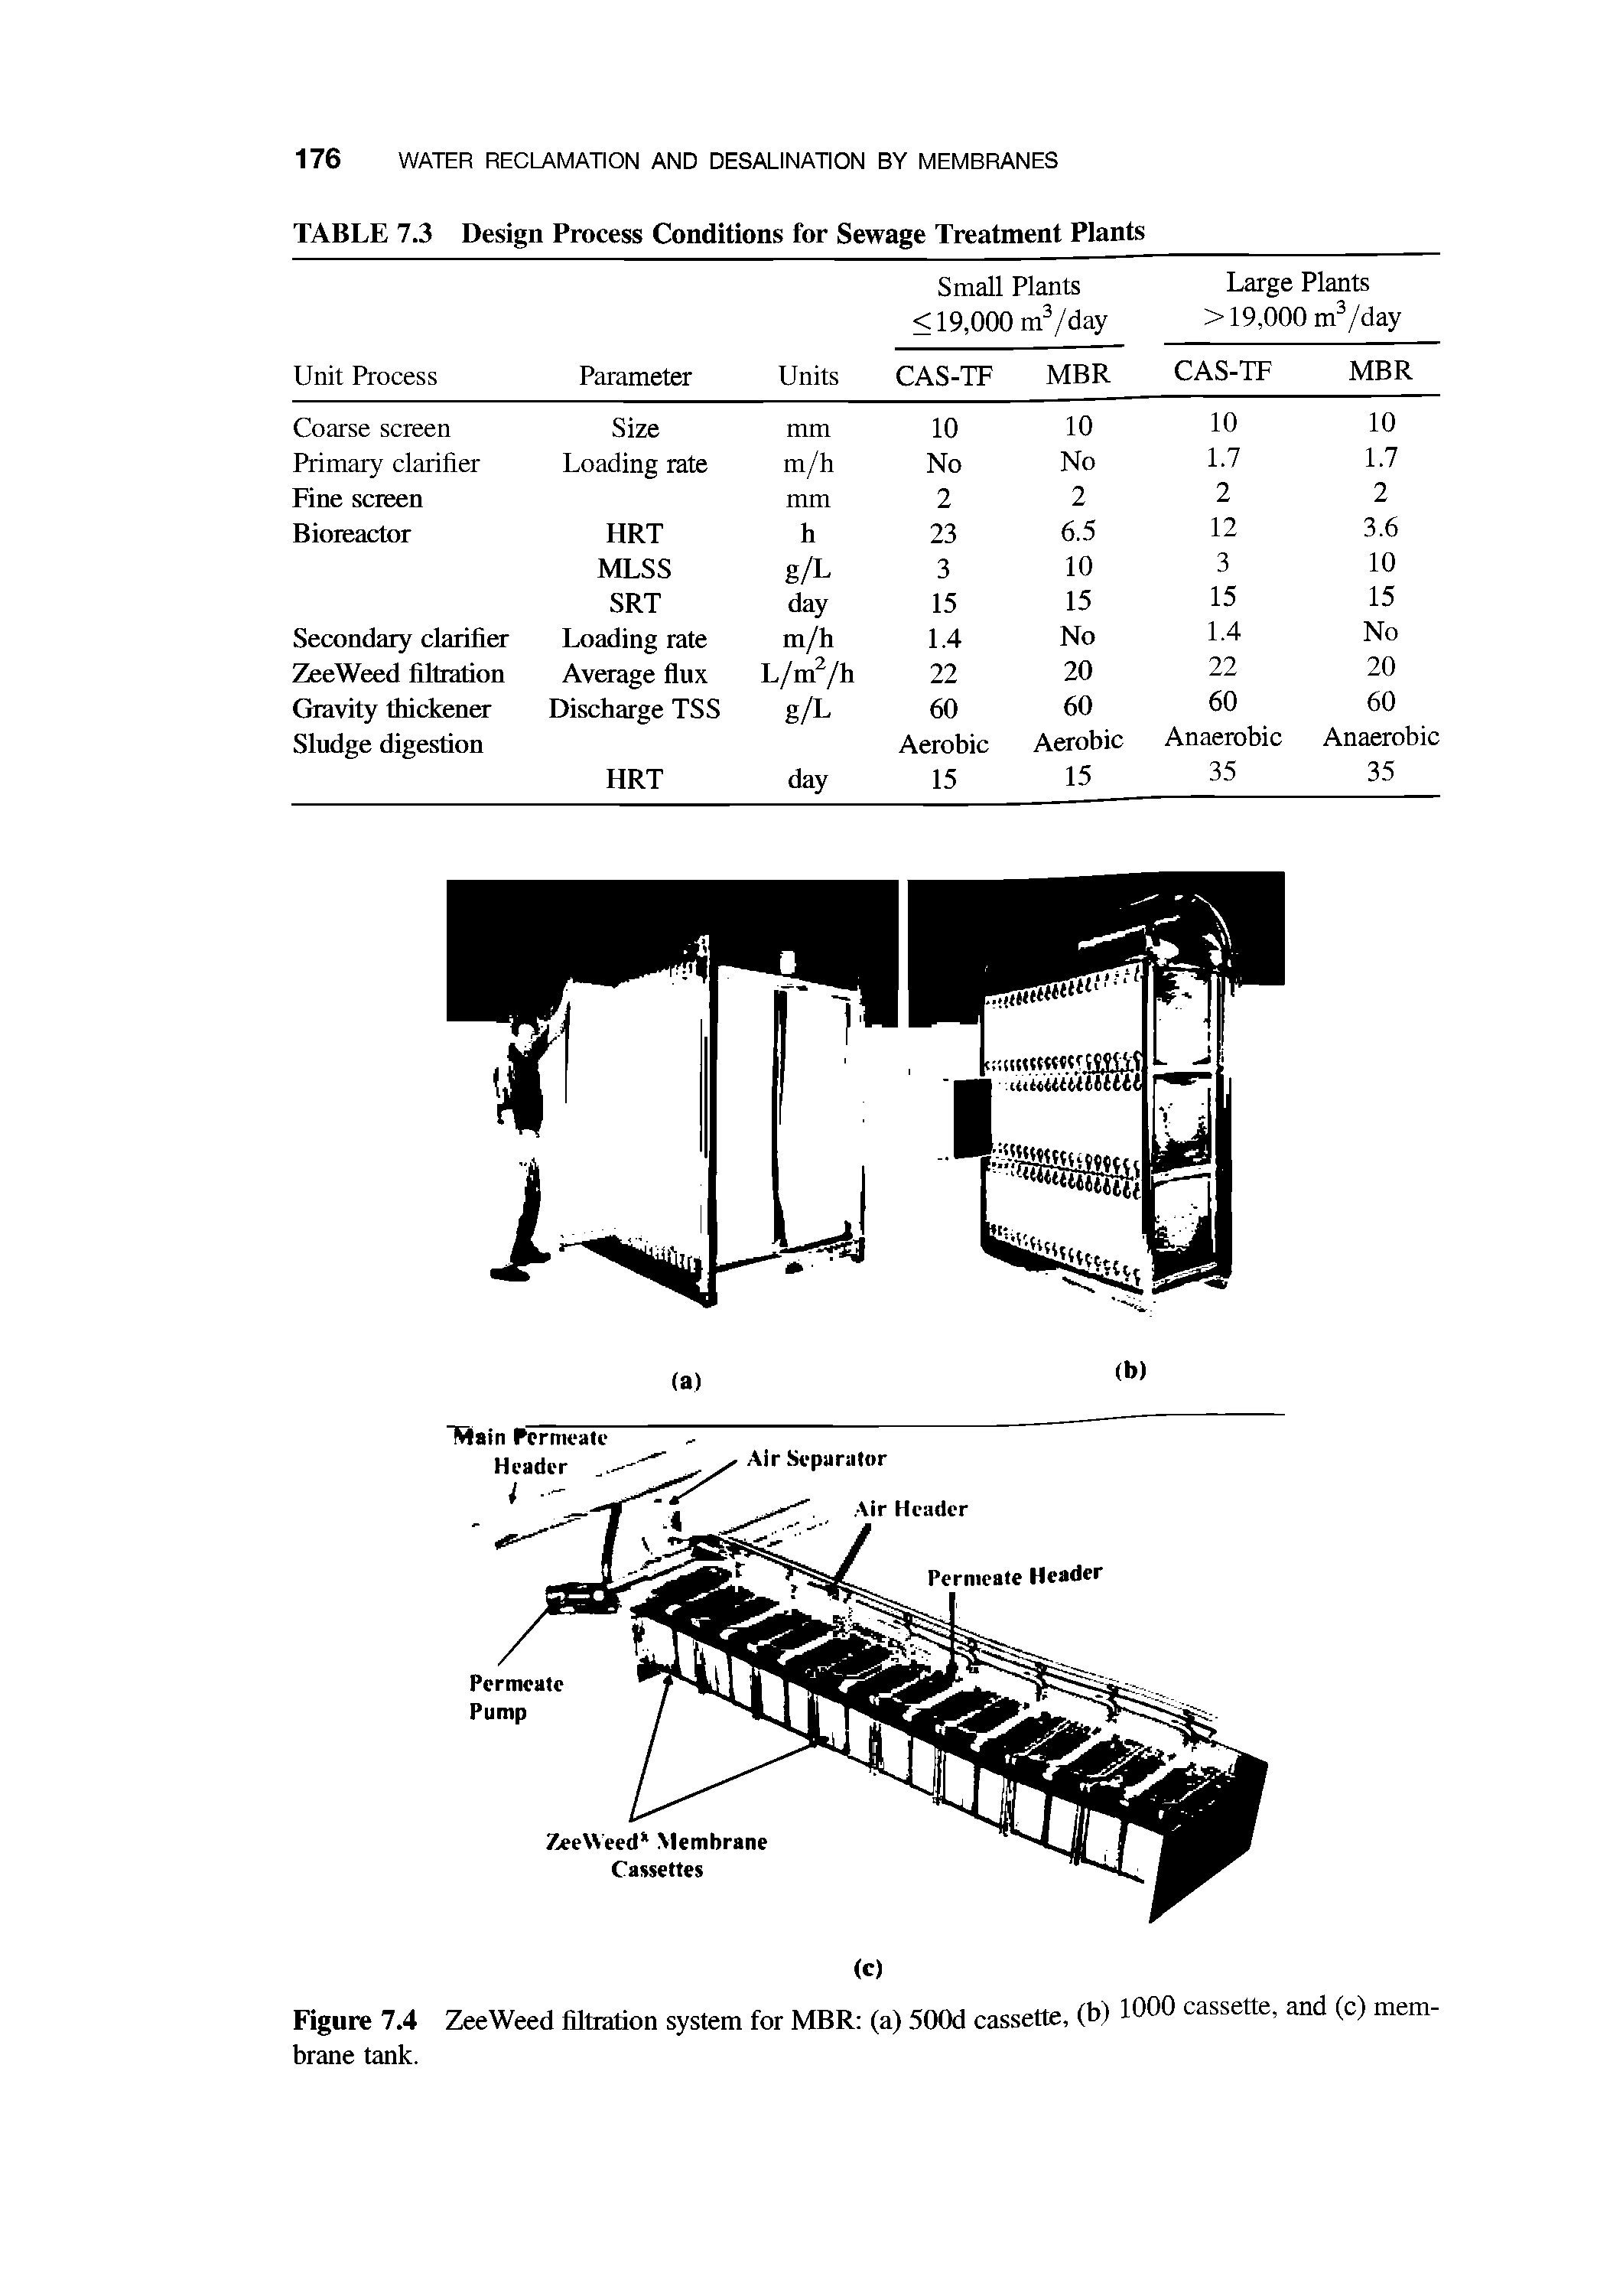 Figure 7.4 Zee Weed filtration system for MBR (a) 500d cassette, (b) 100 cassette, and (c) membrane tank.